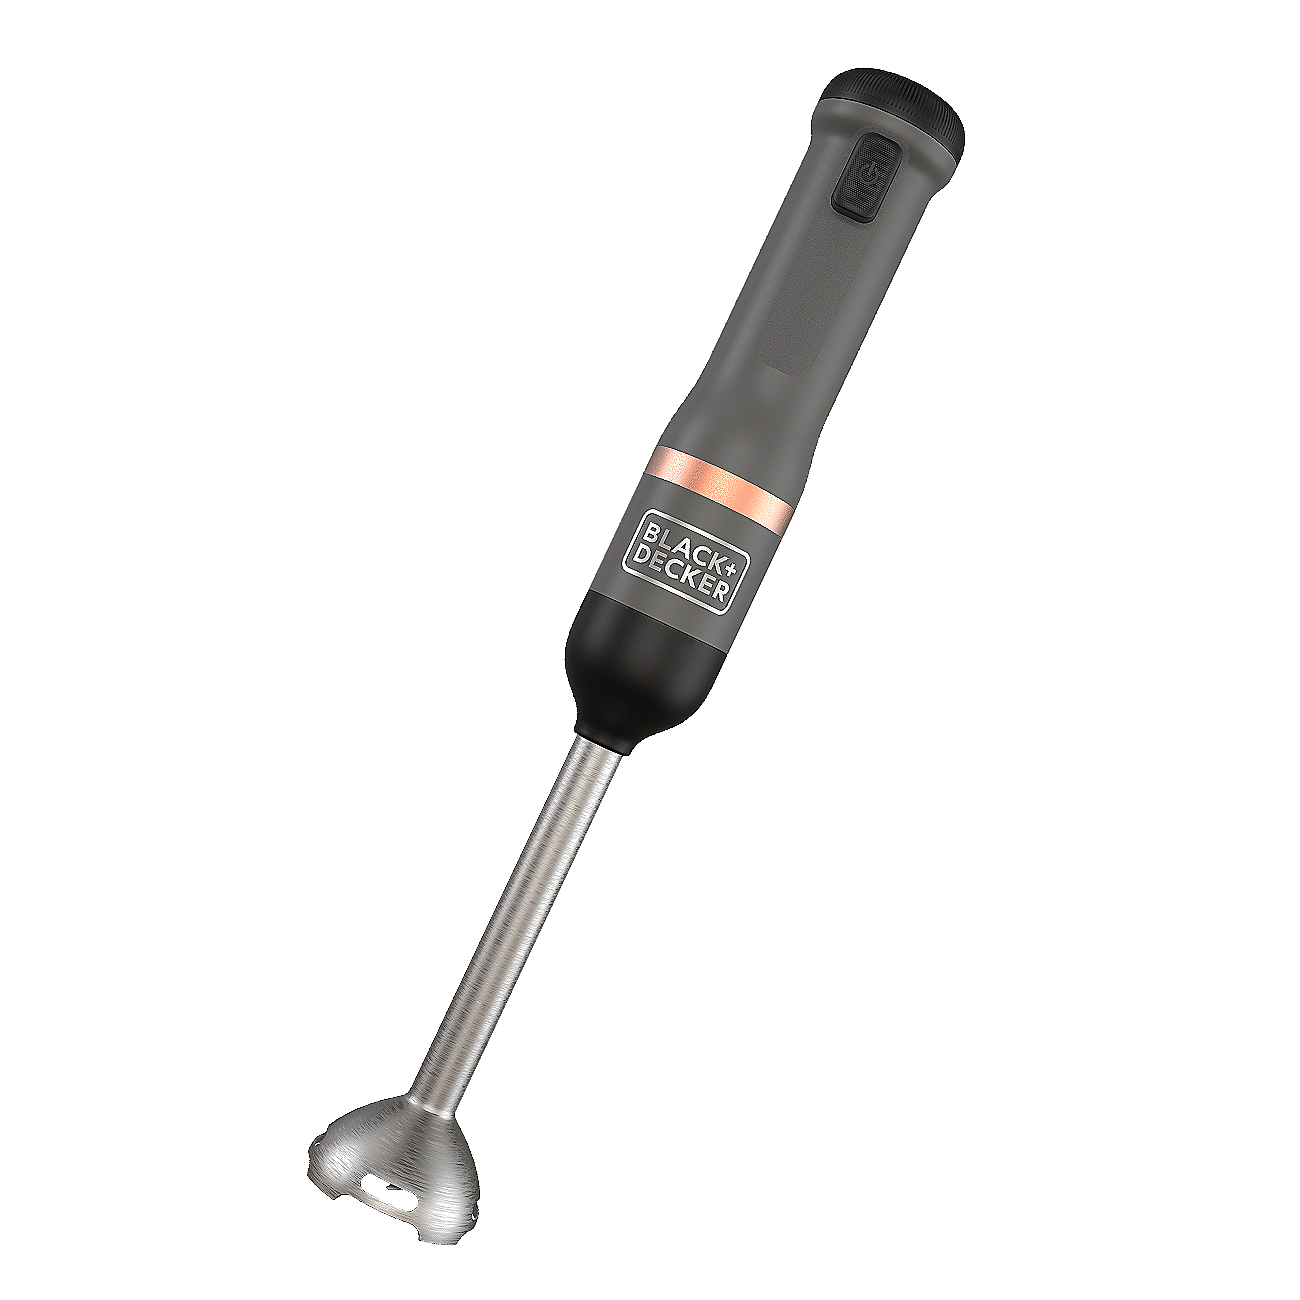 BLACK+DECKER Kitchen Wand Cordless Immersion Blender, 3 in 1 Multi Tool  Set, Hand Blender with Charging Dock, Whisk, and Chopper, Grey (BCKM1013K01)